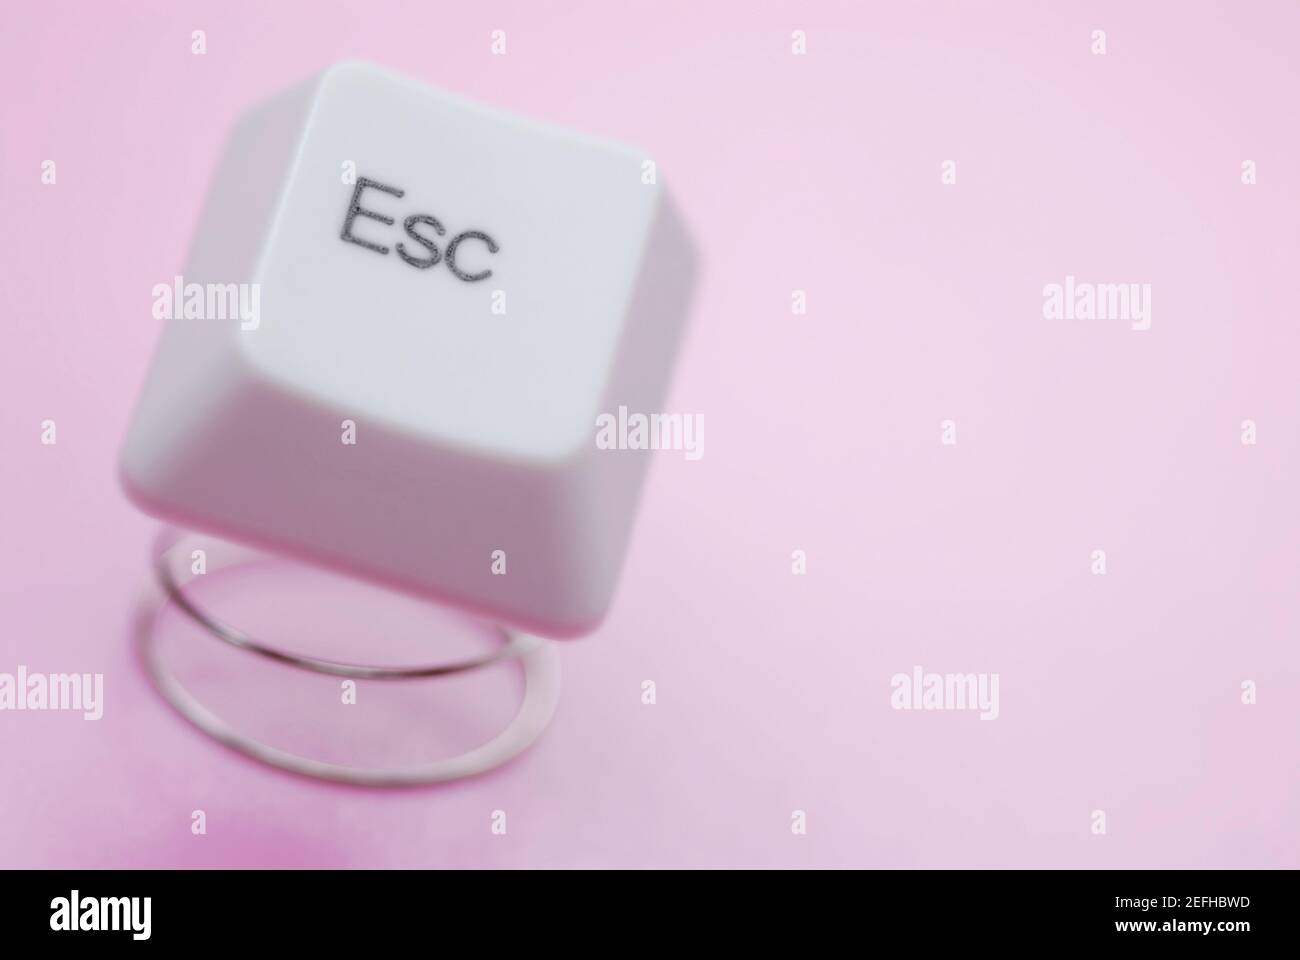 Close up of an escape key Stock Photo